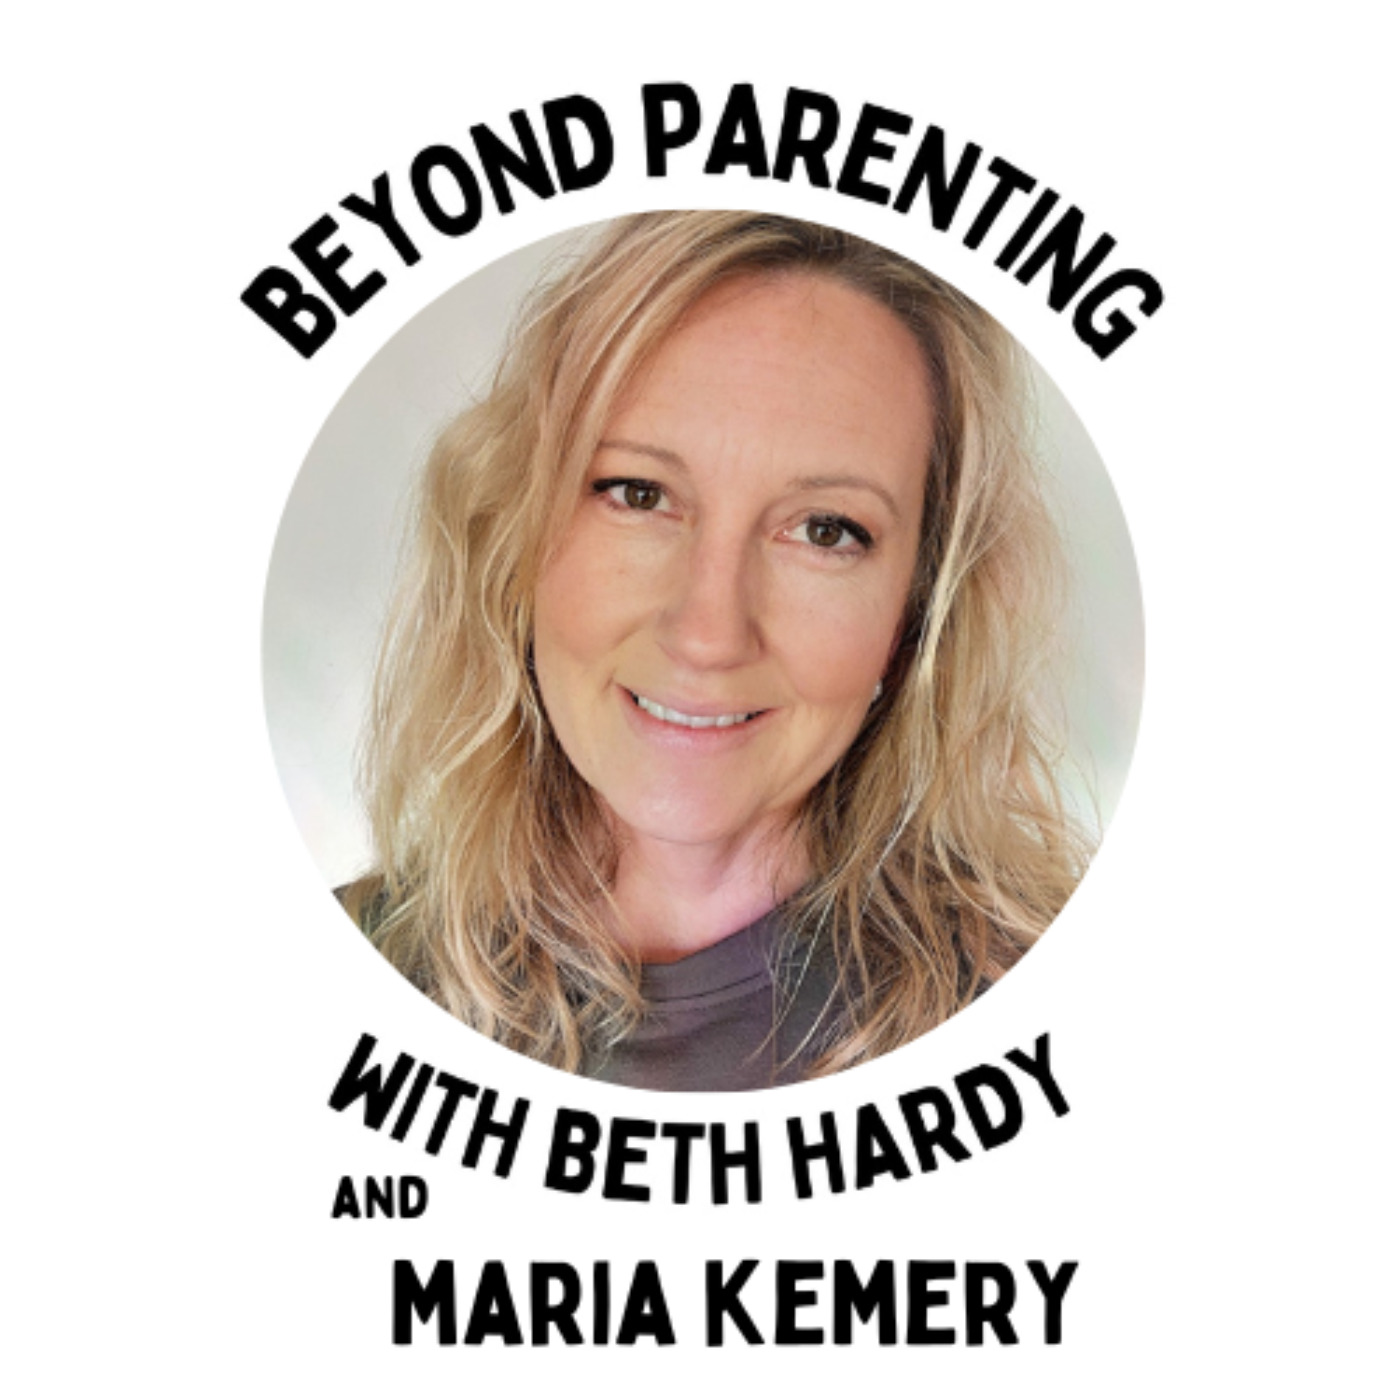 My child has hearing loss with Maria Kemery